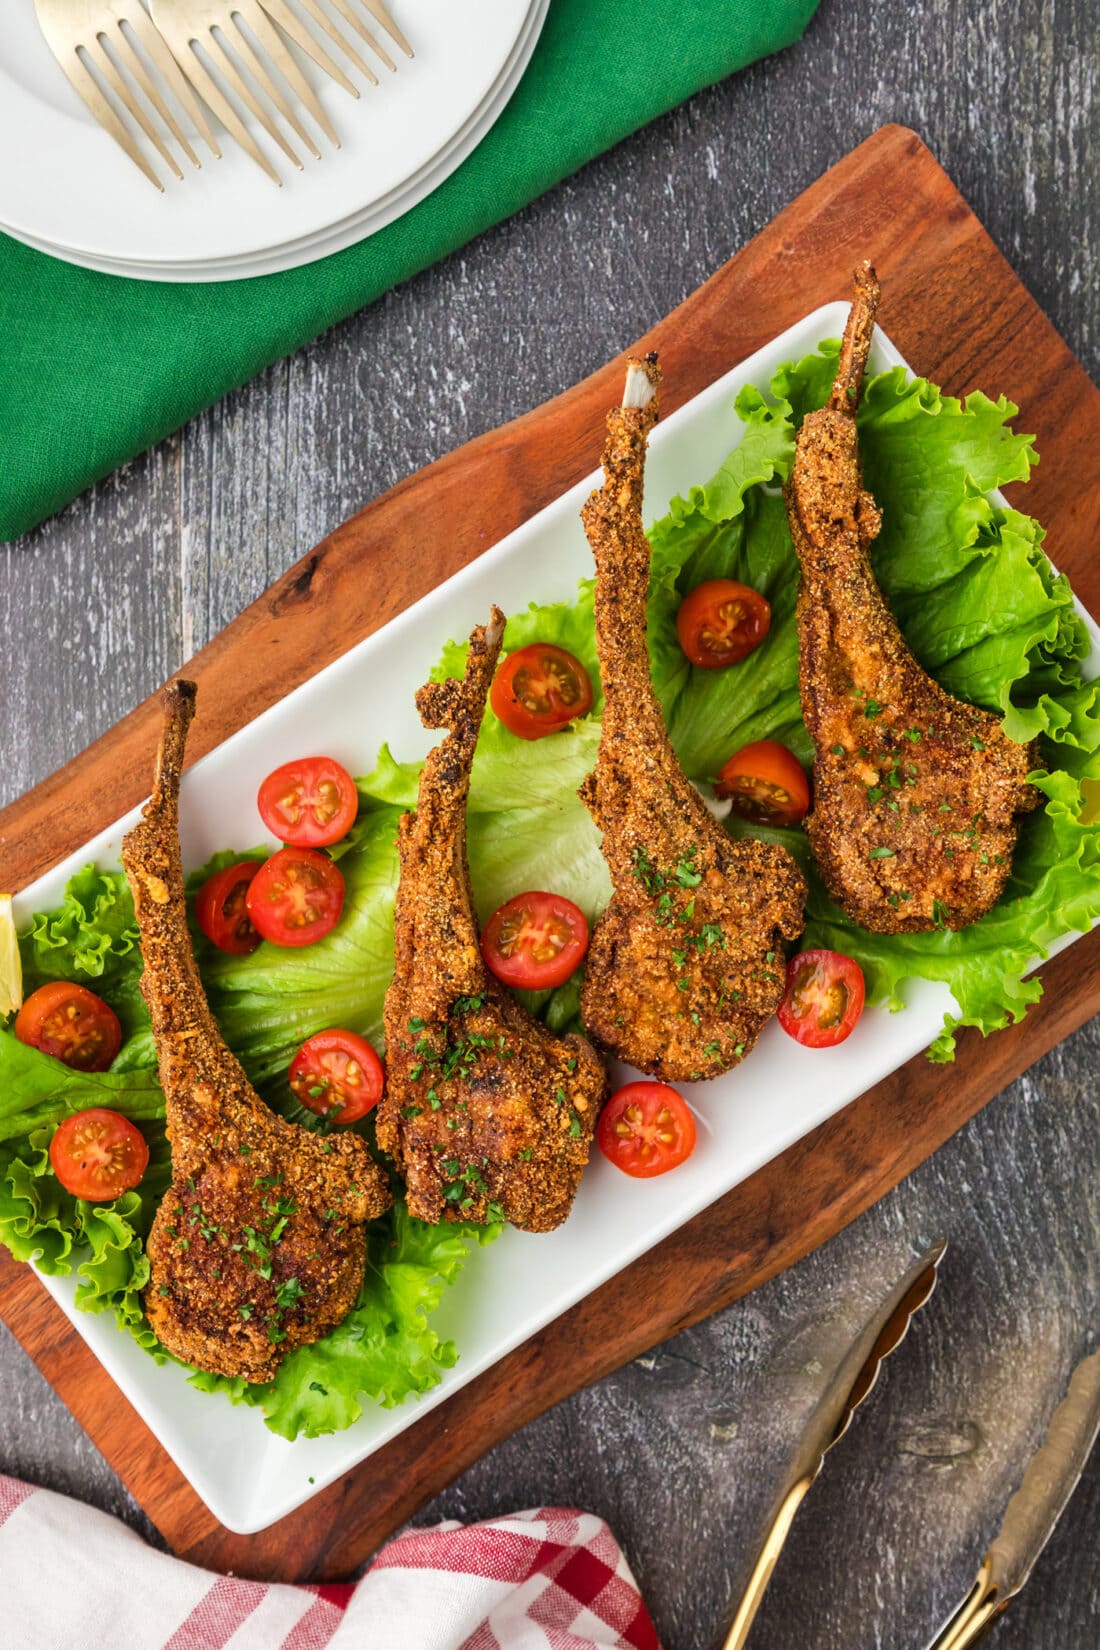 Fried Lamb Chops plated on a bed of lettuce